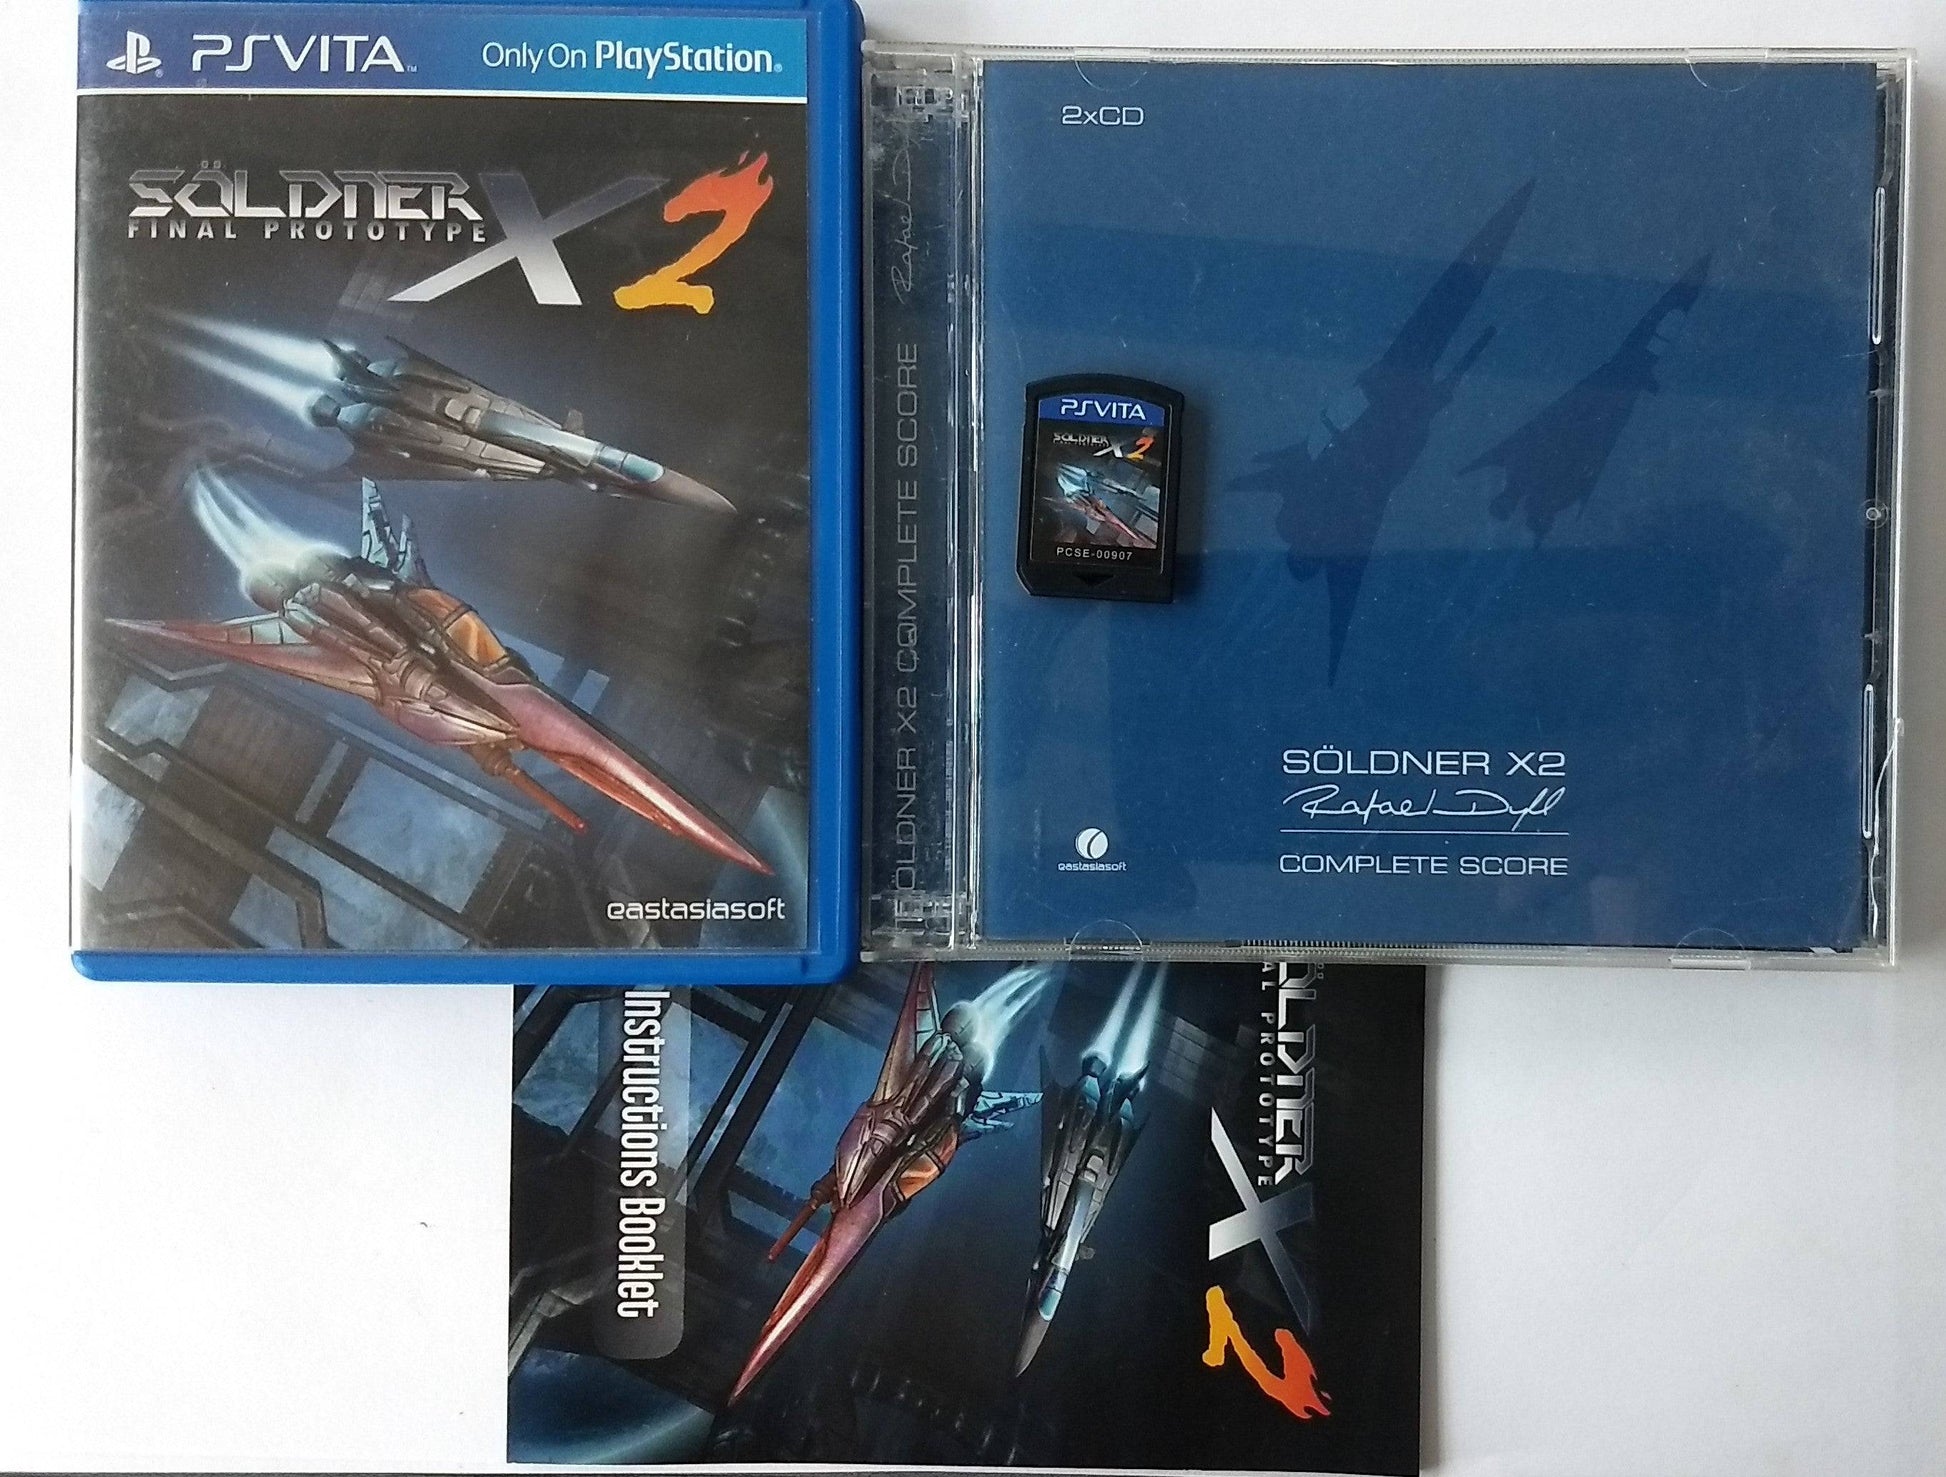 SOLDNER-X 2 FINAL PROTOTYPE LIMITED RUN GAMES LRG #13 PLAYSTATION VITA - jeux video game-x